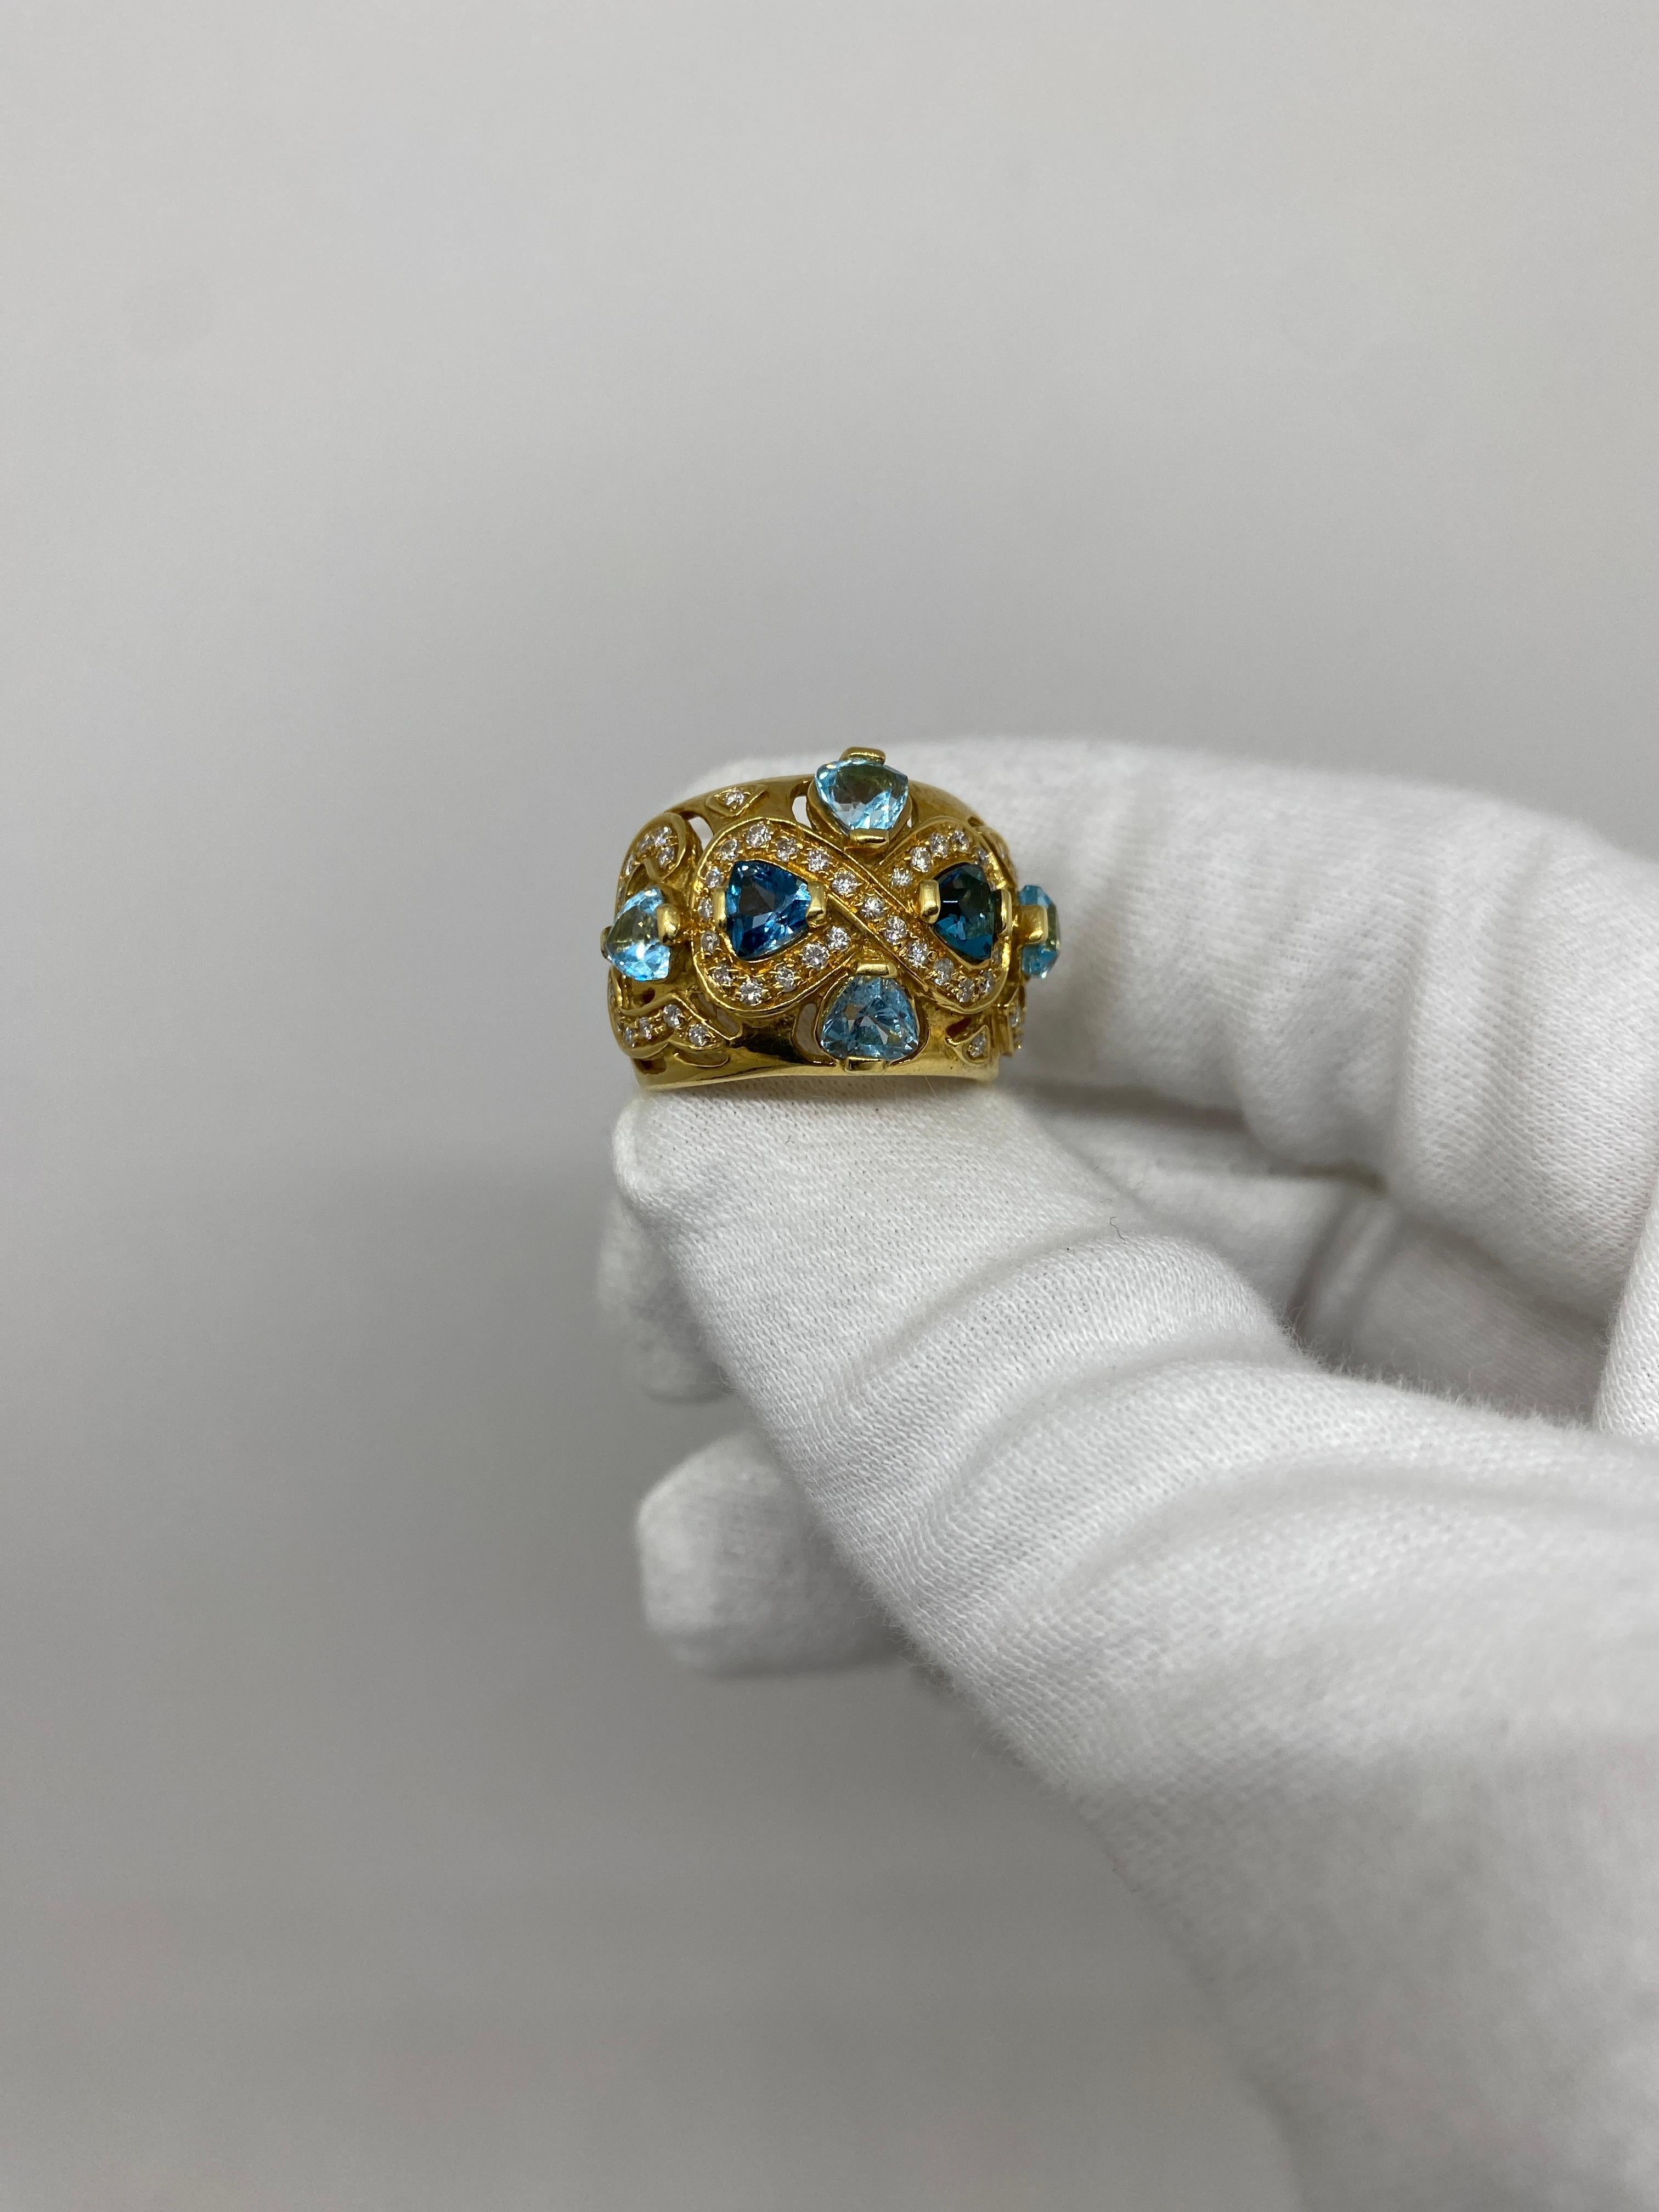 Ring made of 18kt yellow gold with blue topazes and natural brilliant-cut white diamonds

Welcome to our jewelry collection, where every piece tells a story of timeless elegance and unparalleled craftsmanship. As a family-run business in Italy for